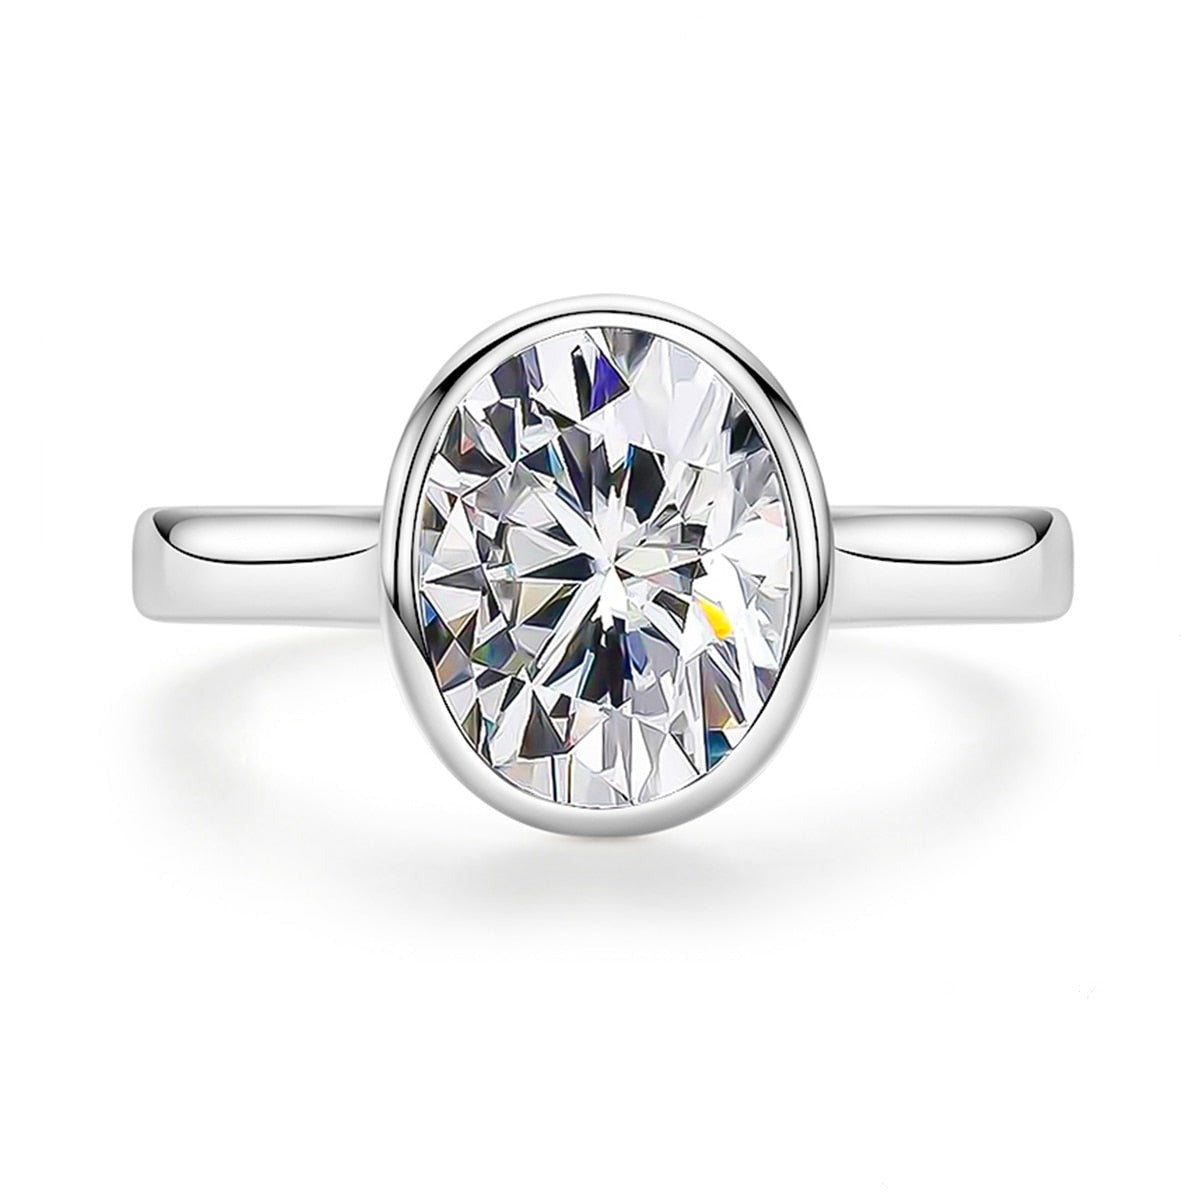 3CT oval cut moissanite set in a sterling silver bezel style setting.